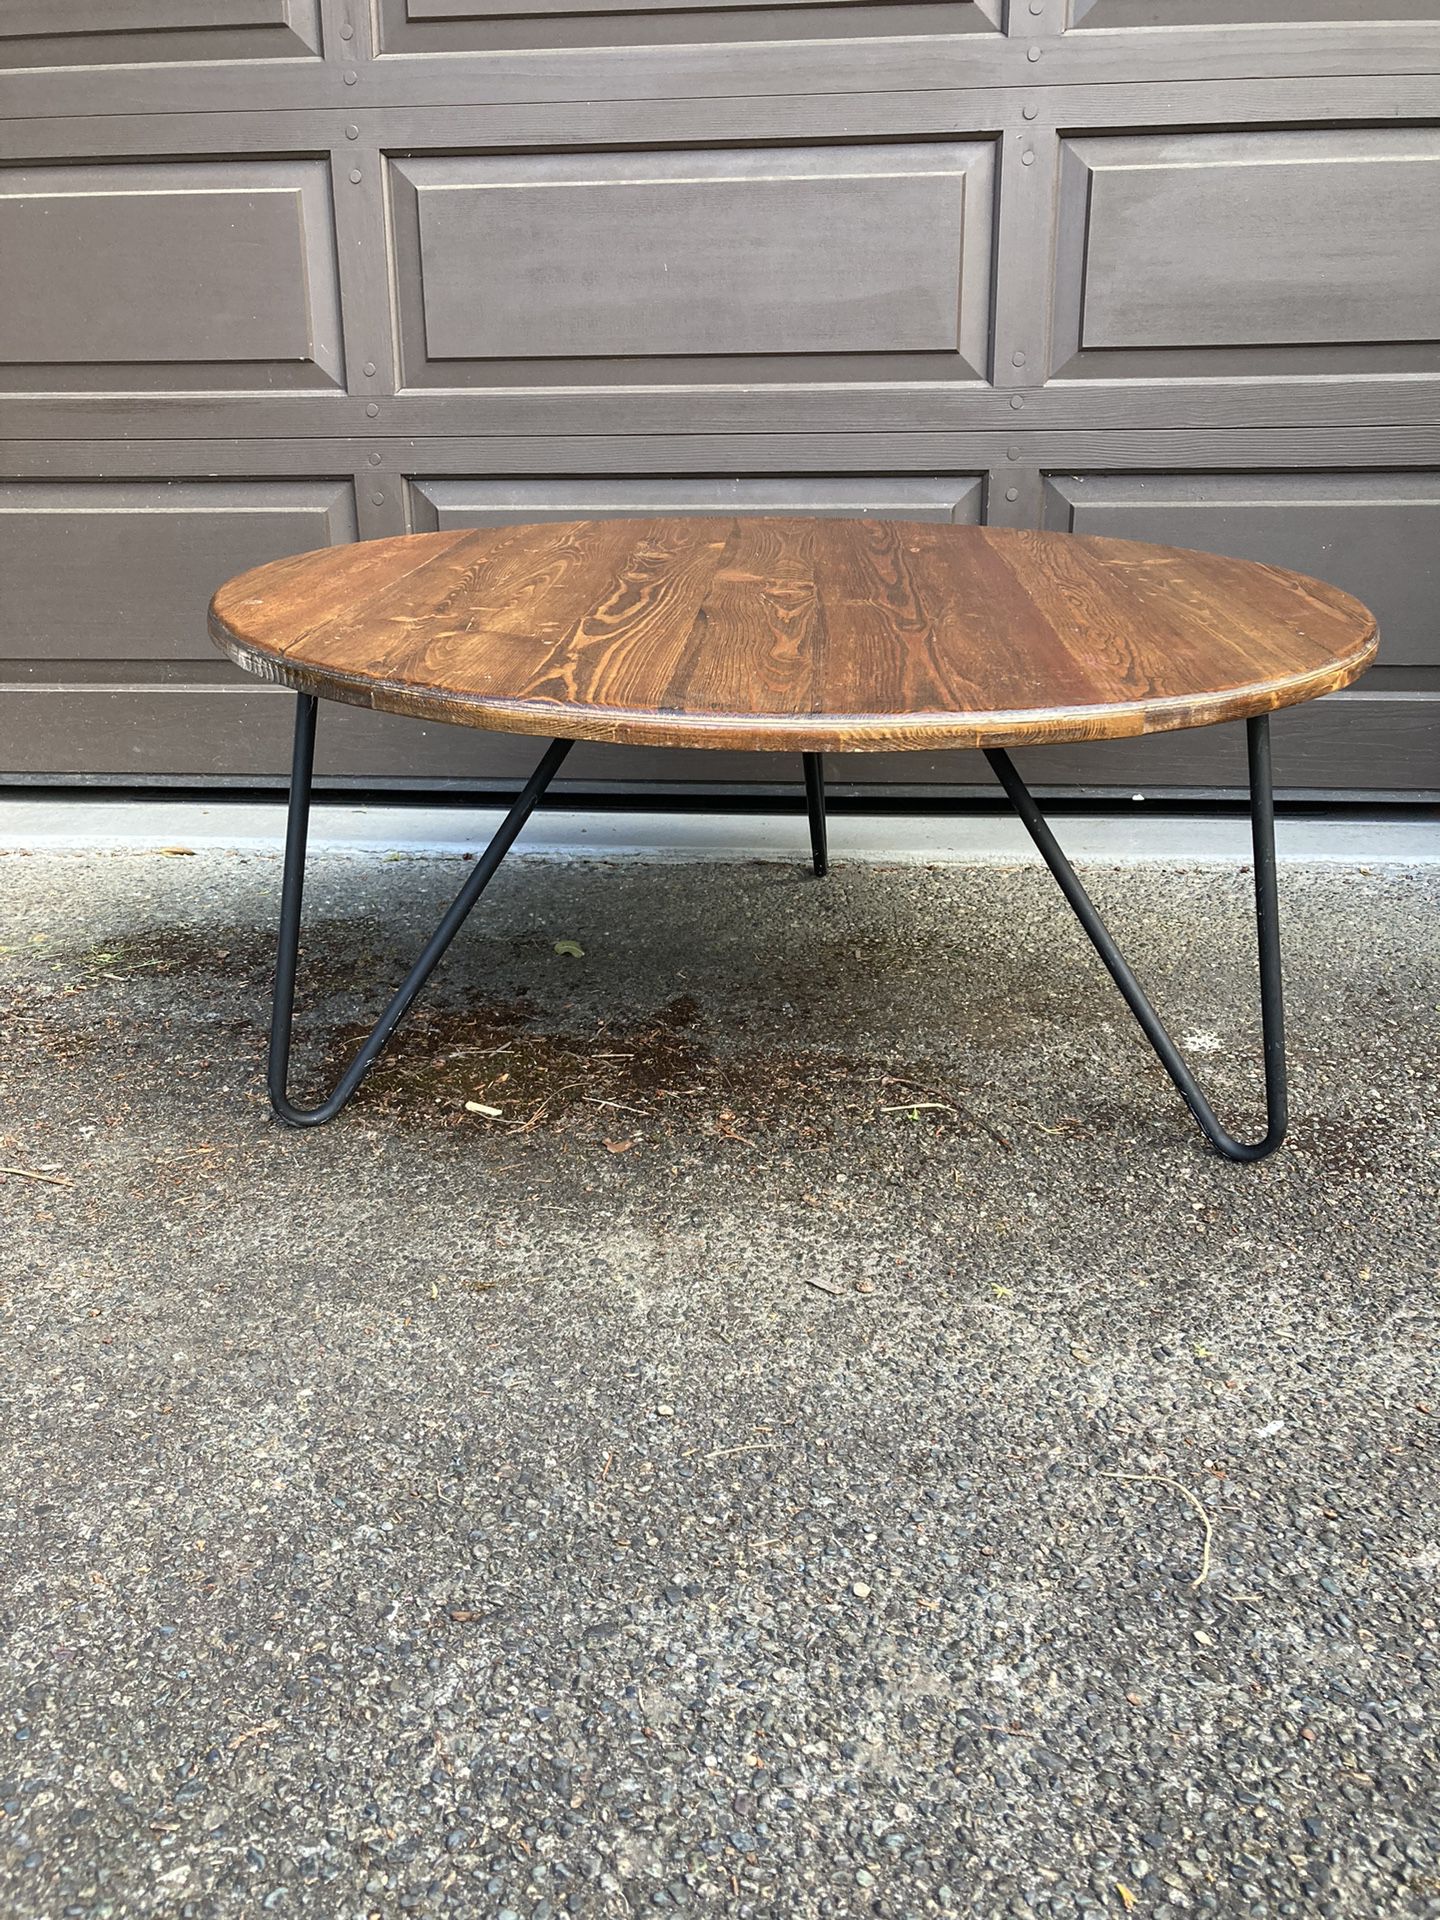 Round Coffee table